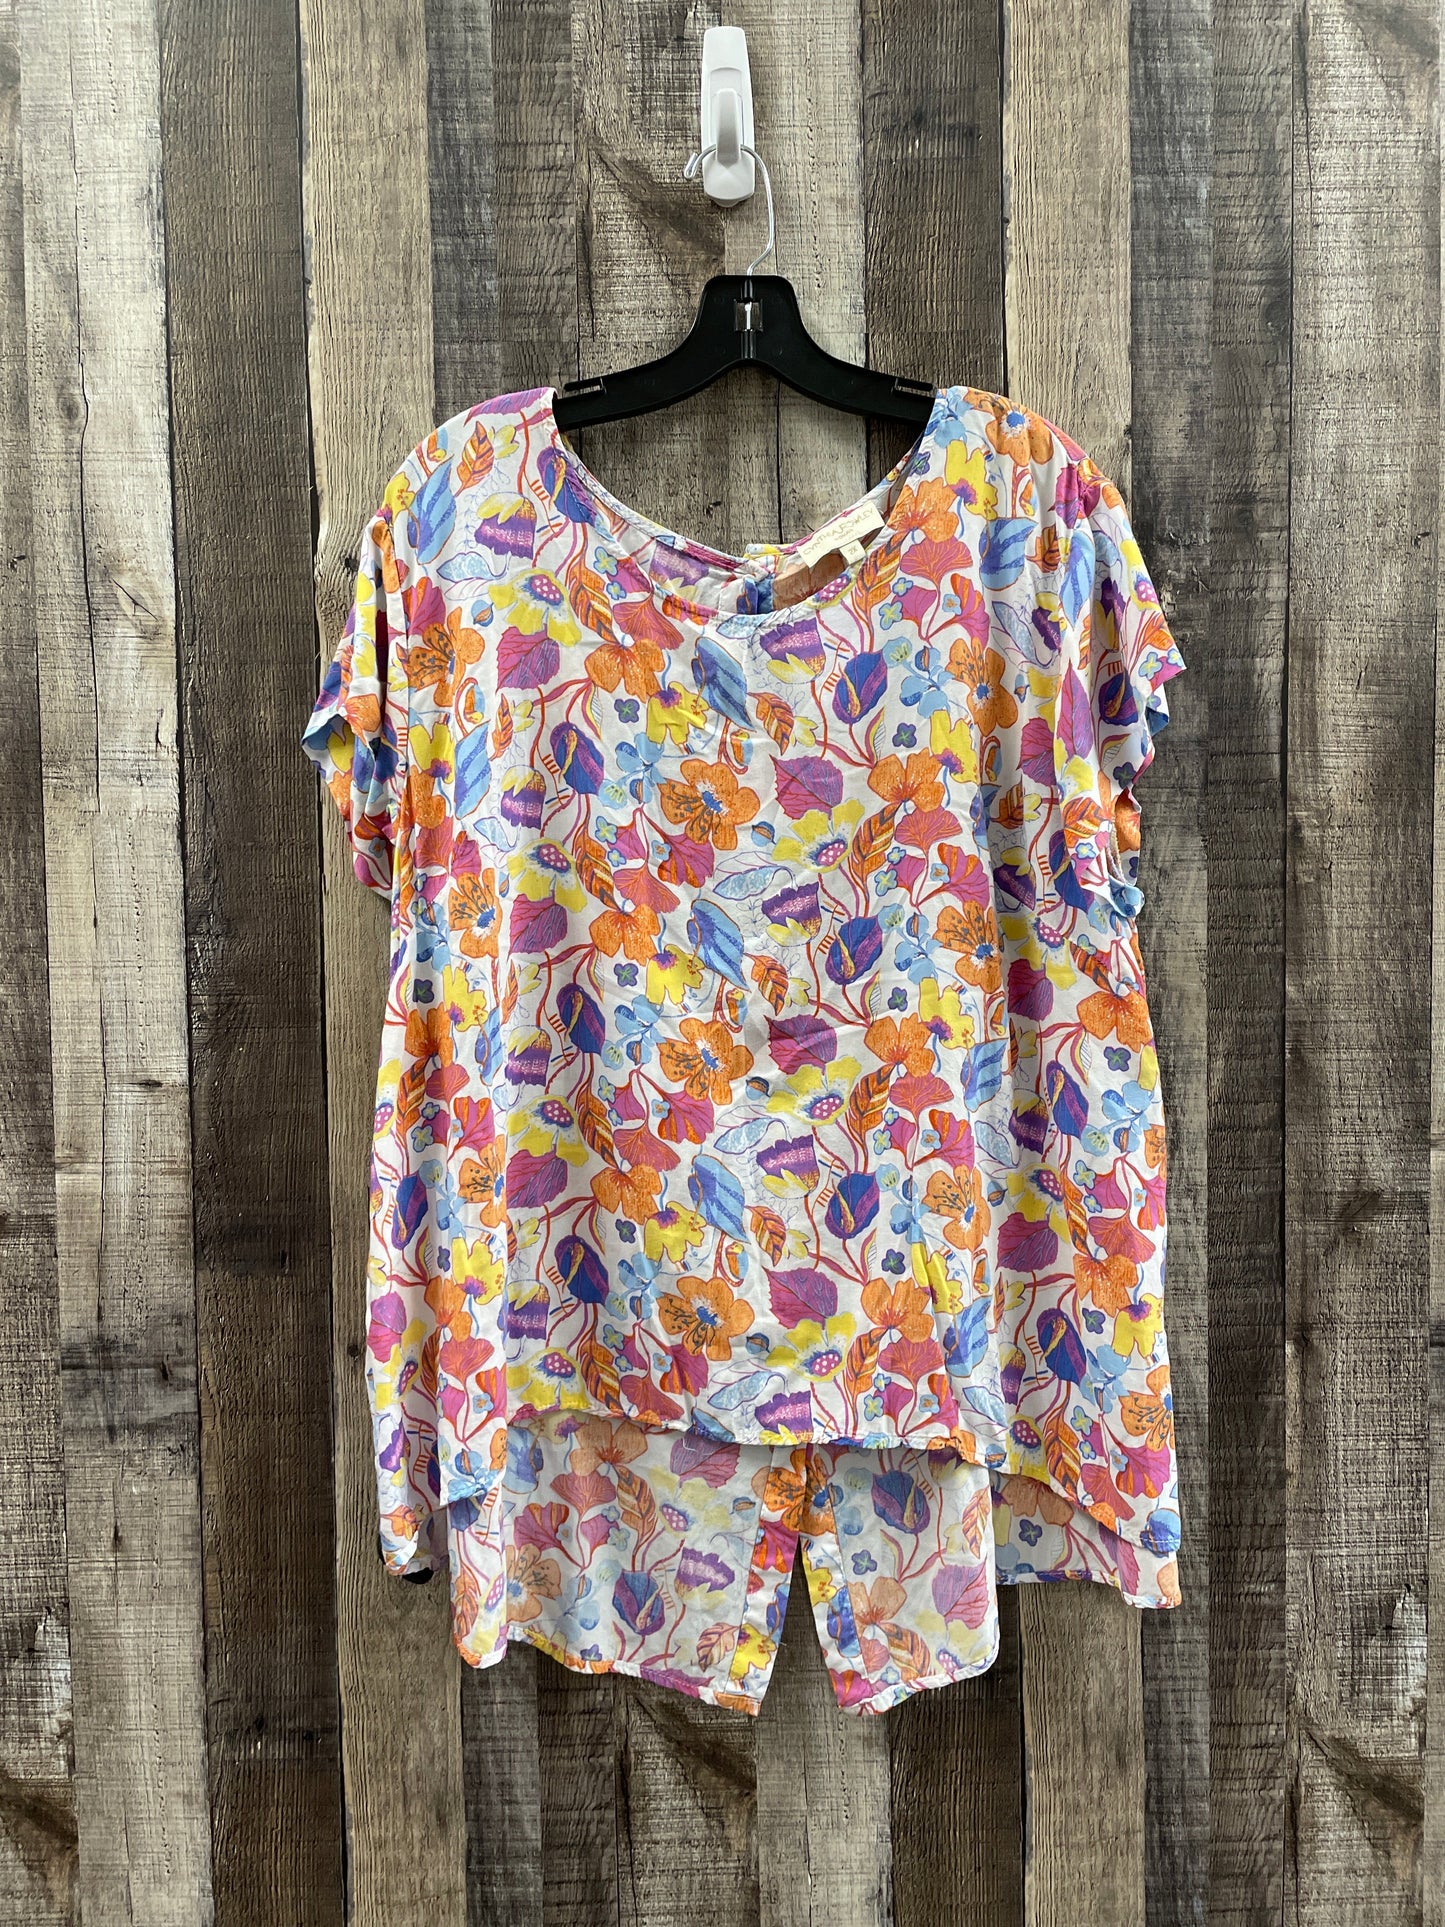 Multi-colored Top Short Sleeve Cynthia Rowley, Size 2x